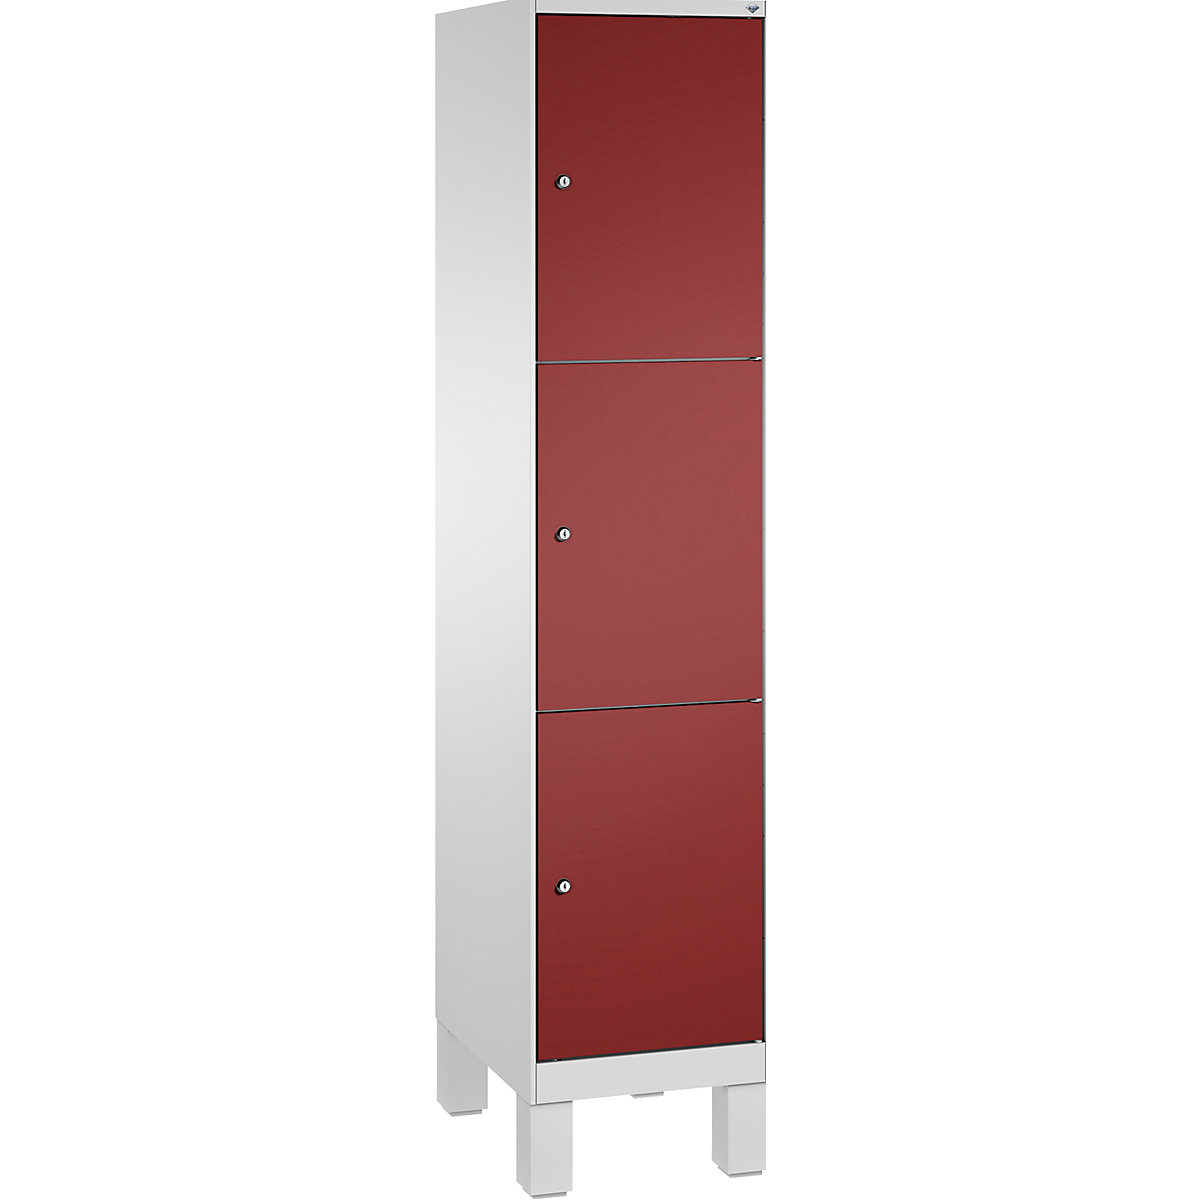 EVOLO locker unit, with feet – C+P, 1 compartment, 3 shelf compartments, compartment width 400 mm, light grey / ruby red